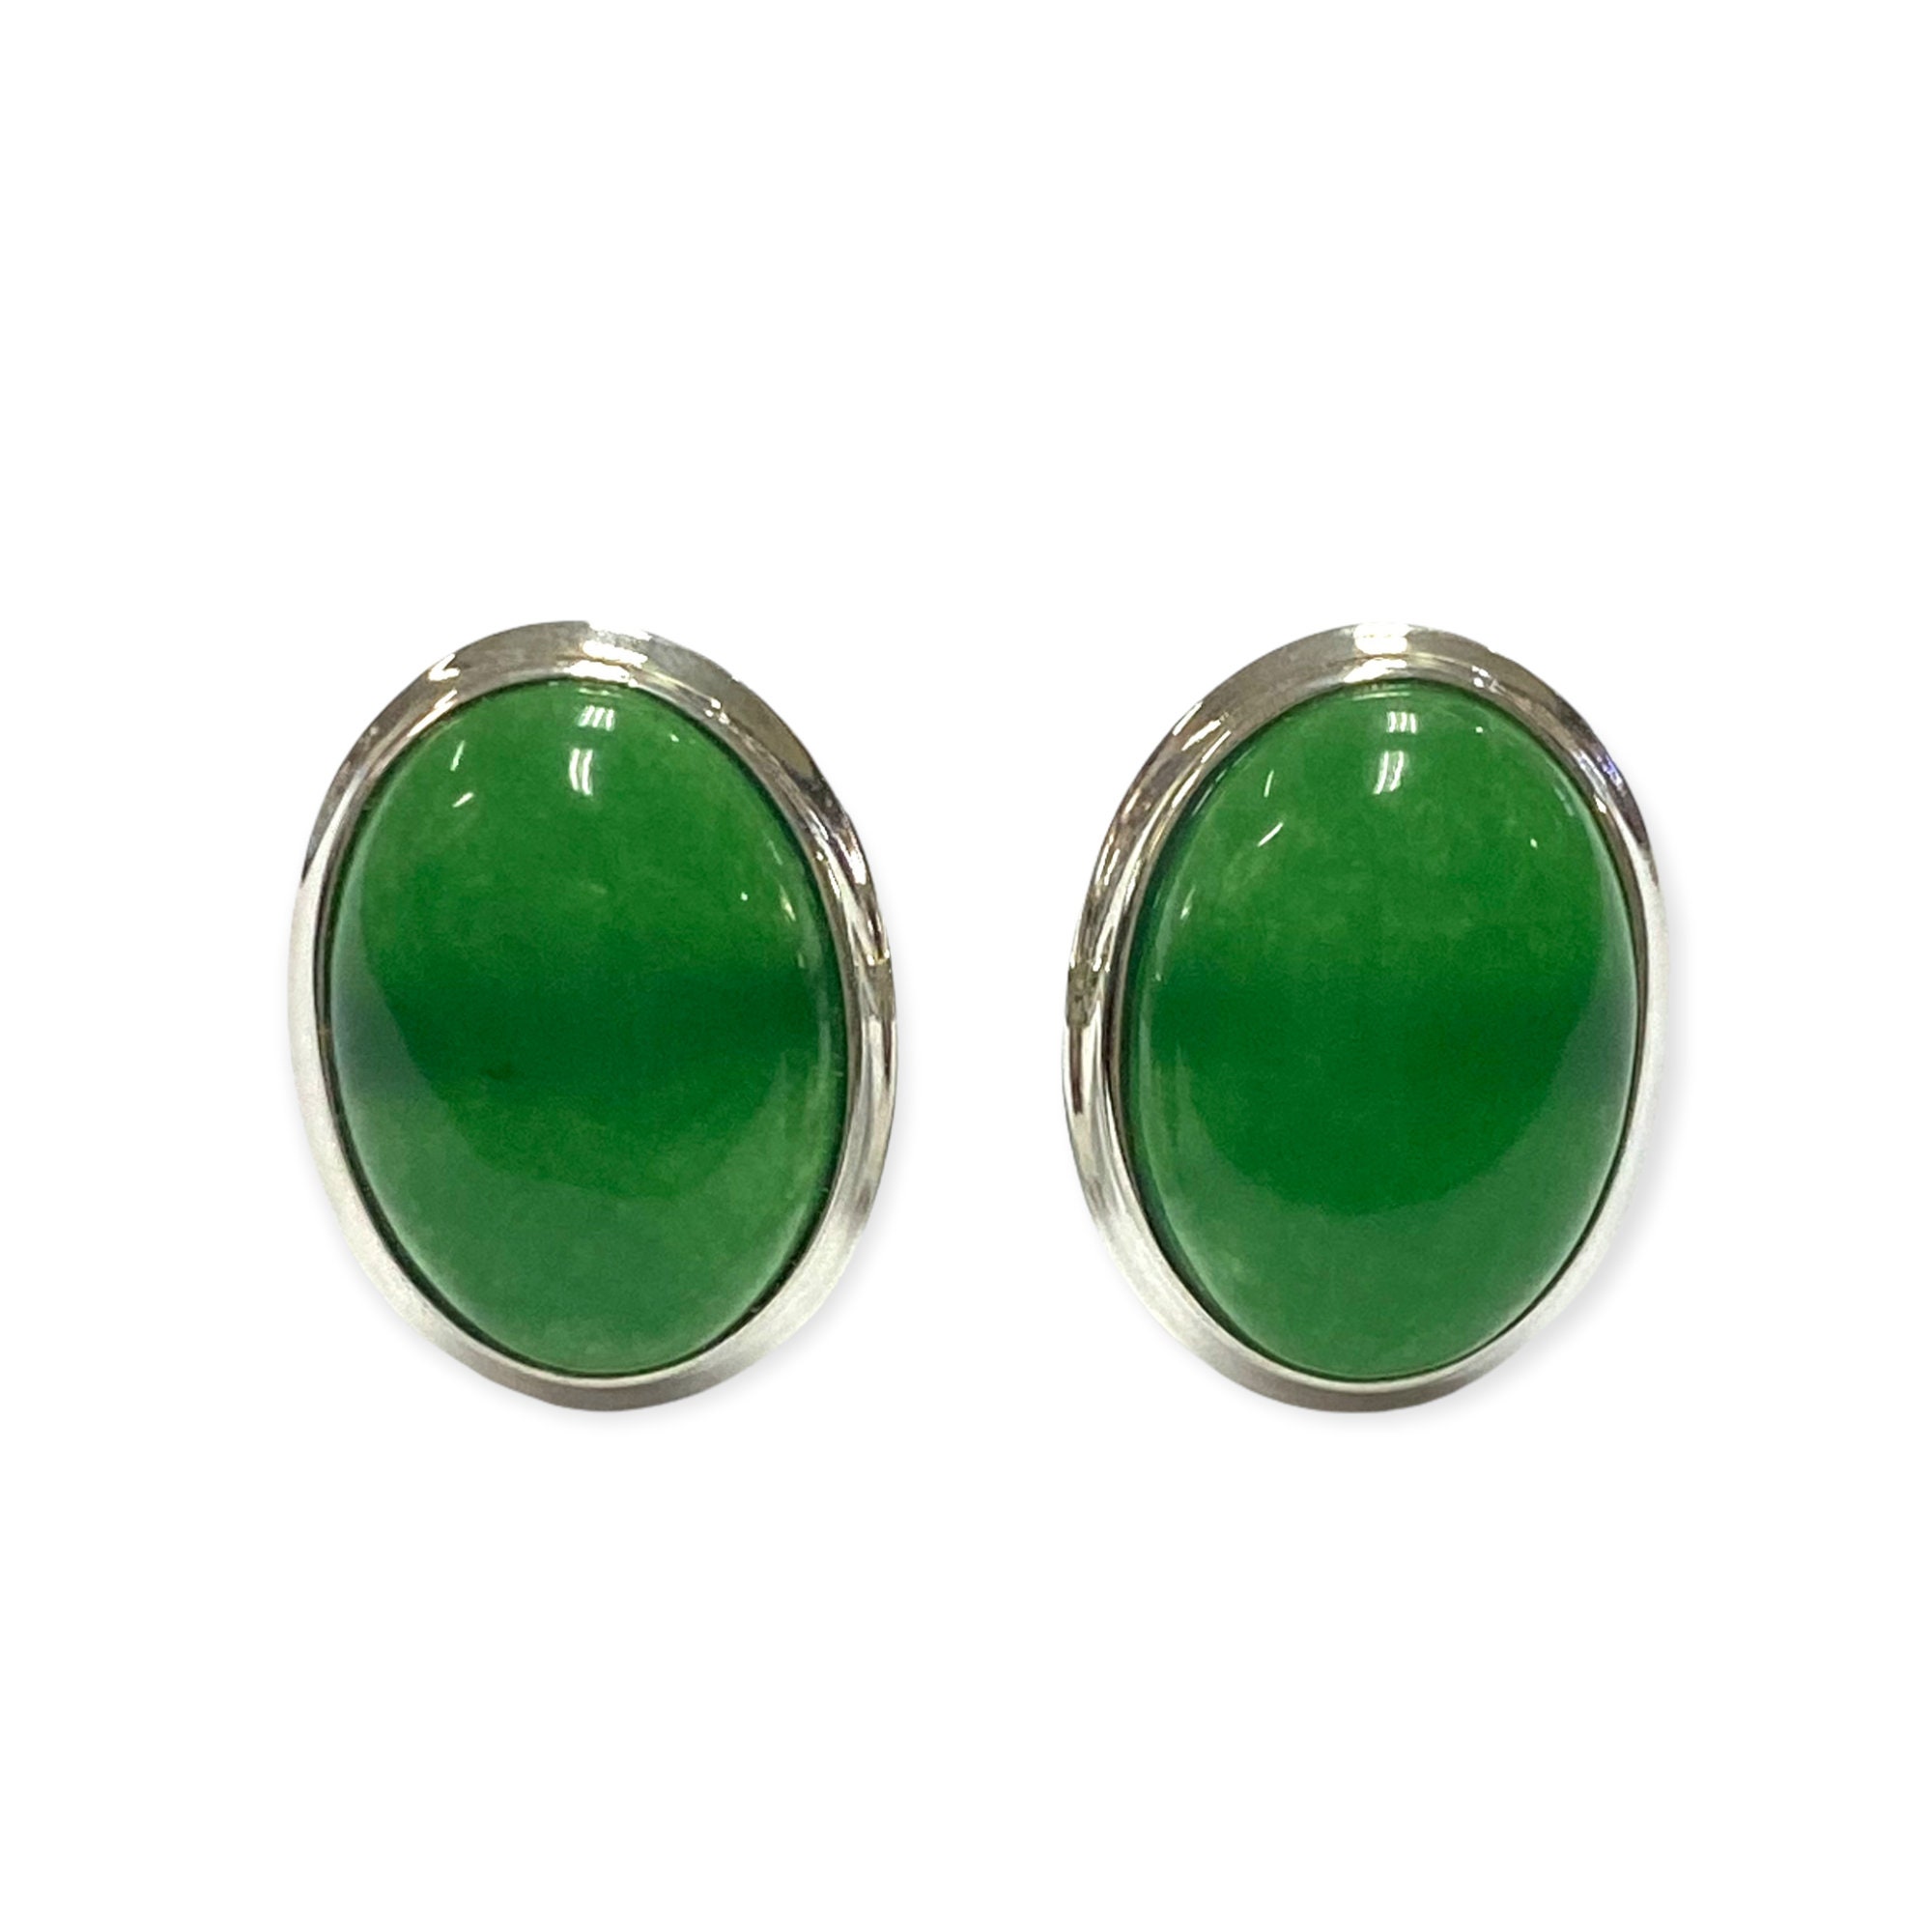 Gift Day Sterling Fathers Mens Green 925 Silver - Oval Cufflinks Jade Etsy Victorian Style